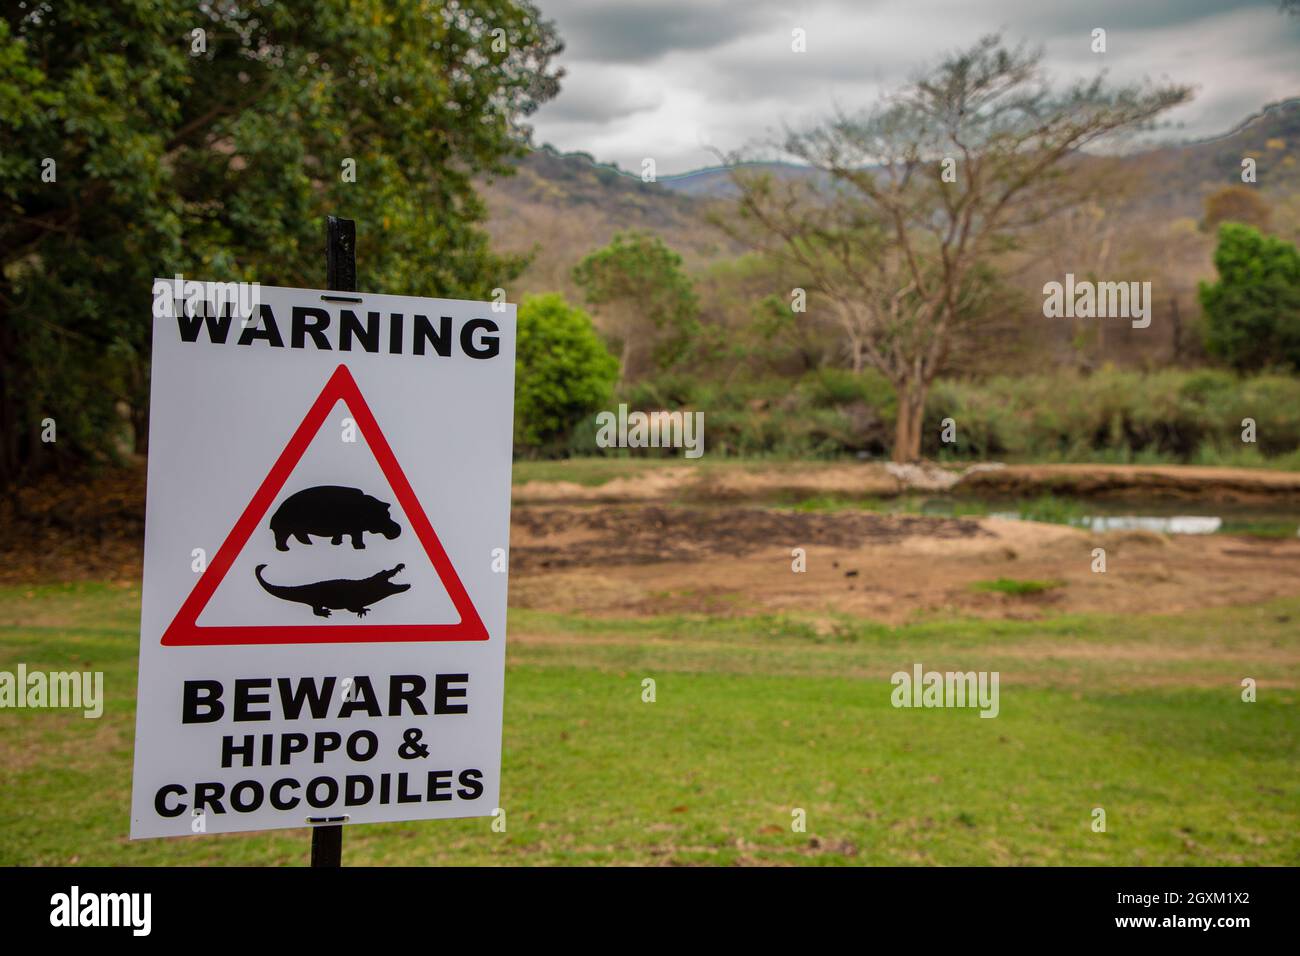 Warning sign indicating that there are hippopotamus and crocodile danger in the area Stock Photo